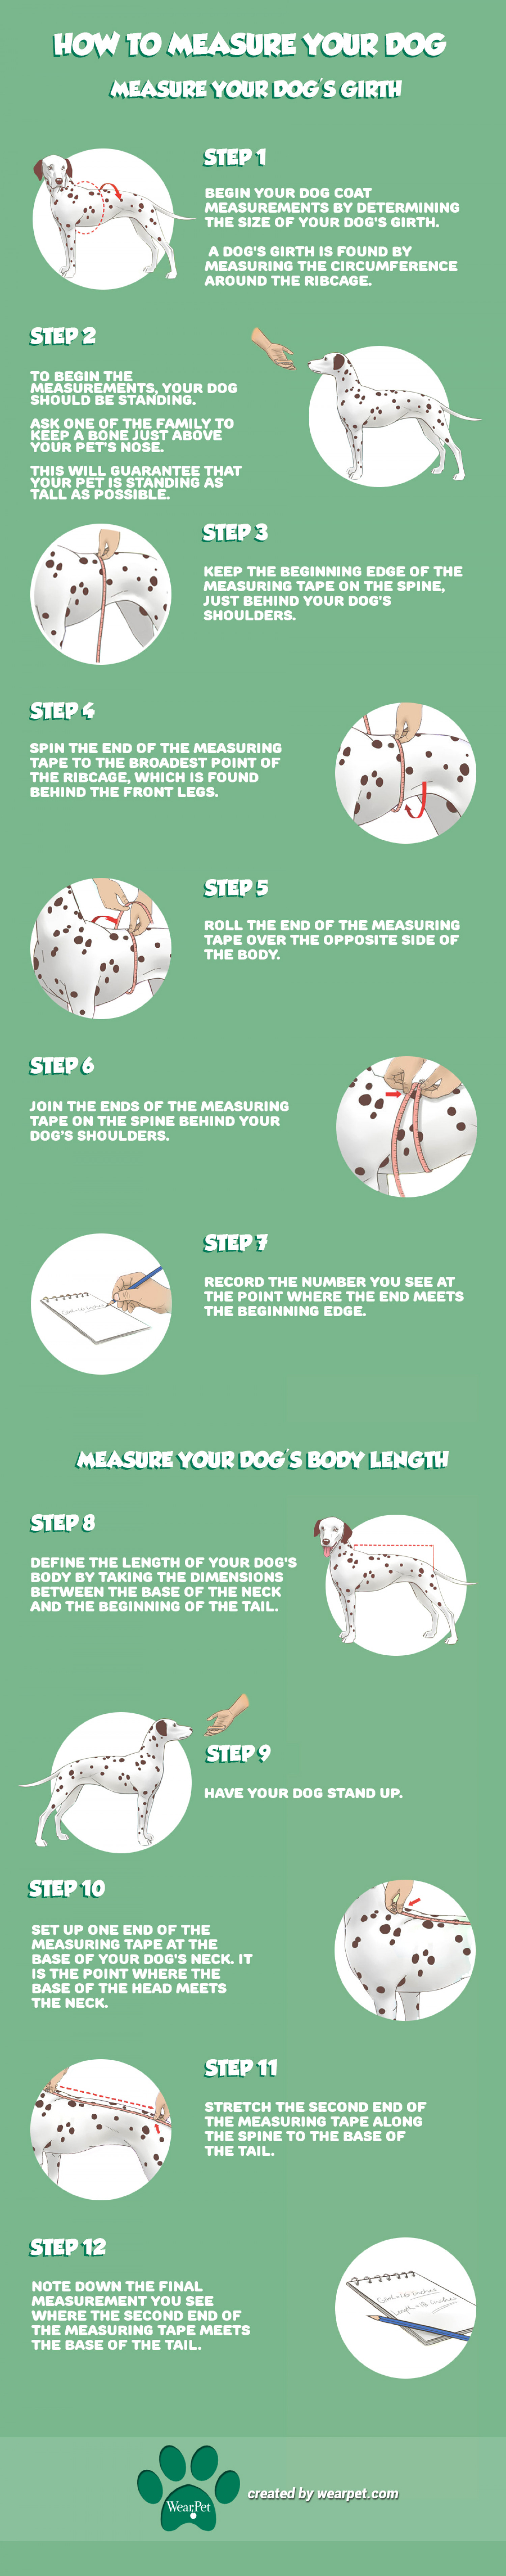 How to measure your dog Infographic